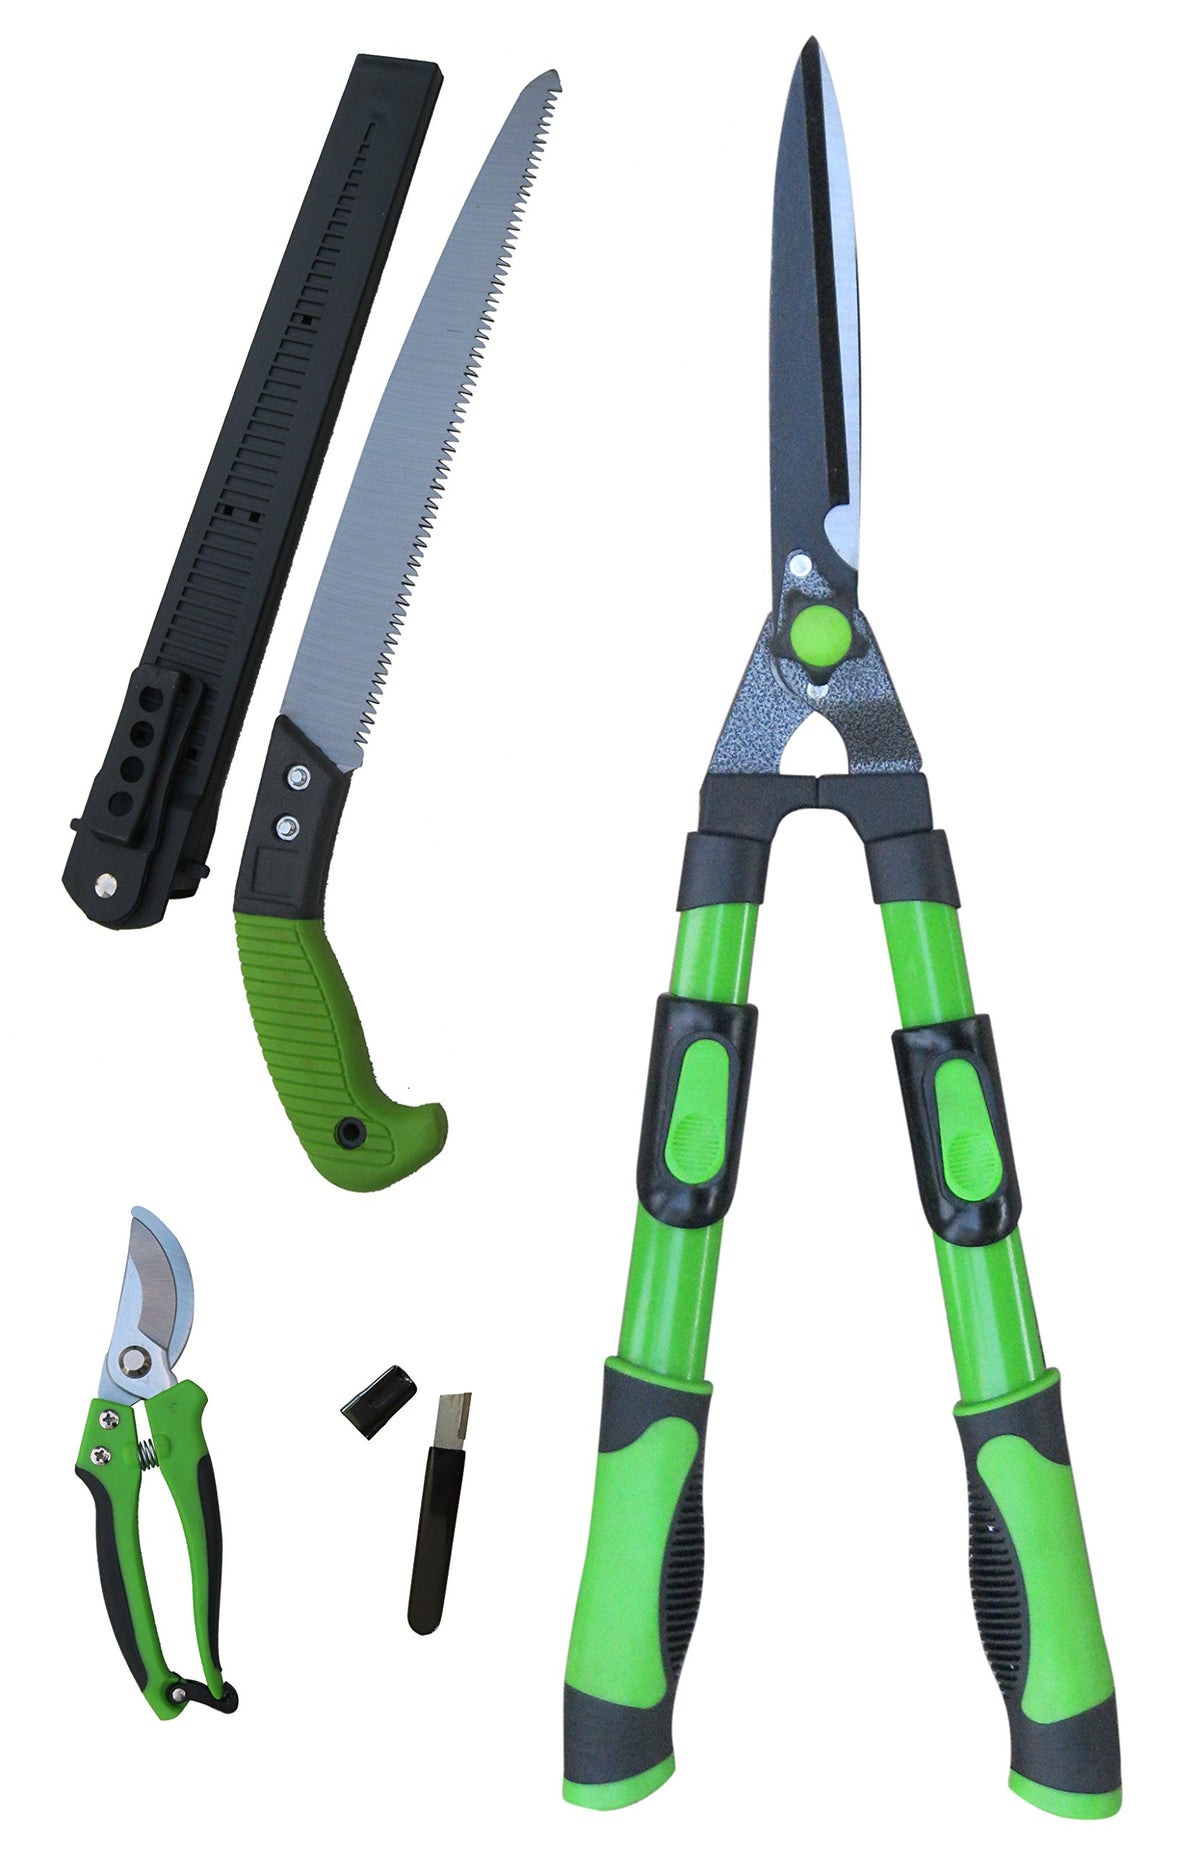 Garden Cutting &amp; Pruning Tools Combo Kit. Set Includes 1 pc each of Hedge Shears Pruners Hand Saw with Cover &amp; a Handy Tungsten Carbide Tools Blade Knife Sharpener. Value Pack Bundle of 4 pcs